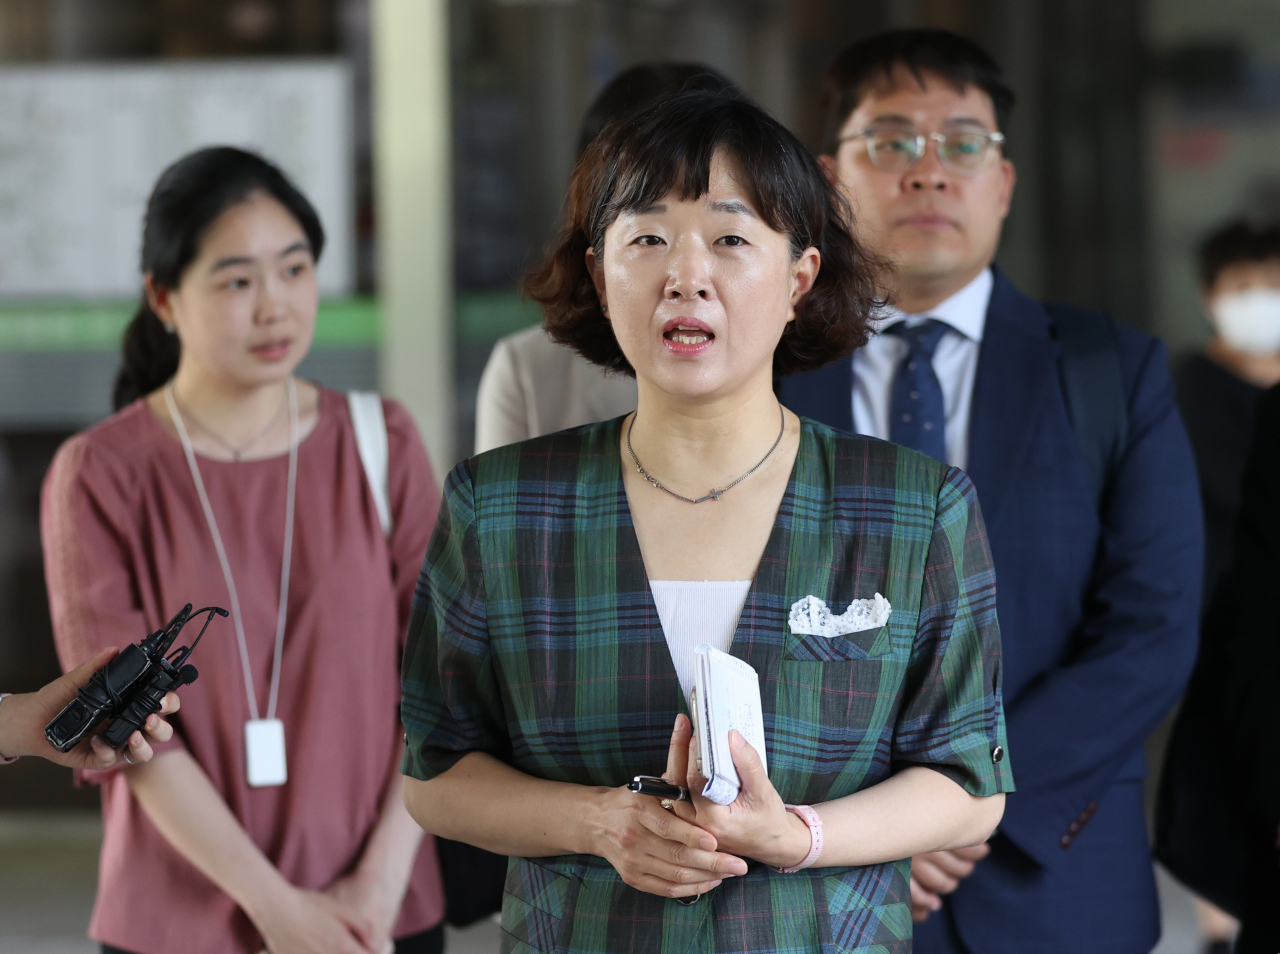 Adam Crapser's attorney Kim Su-jung speaks to reporters after the Seoul Central District Court's ruling on Tuesday. (Yonhap)